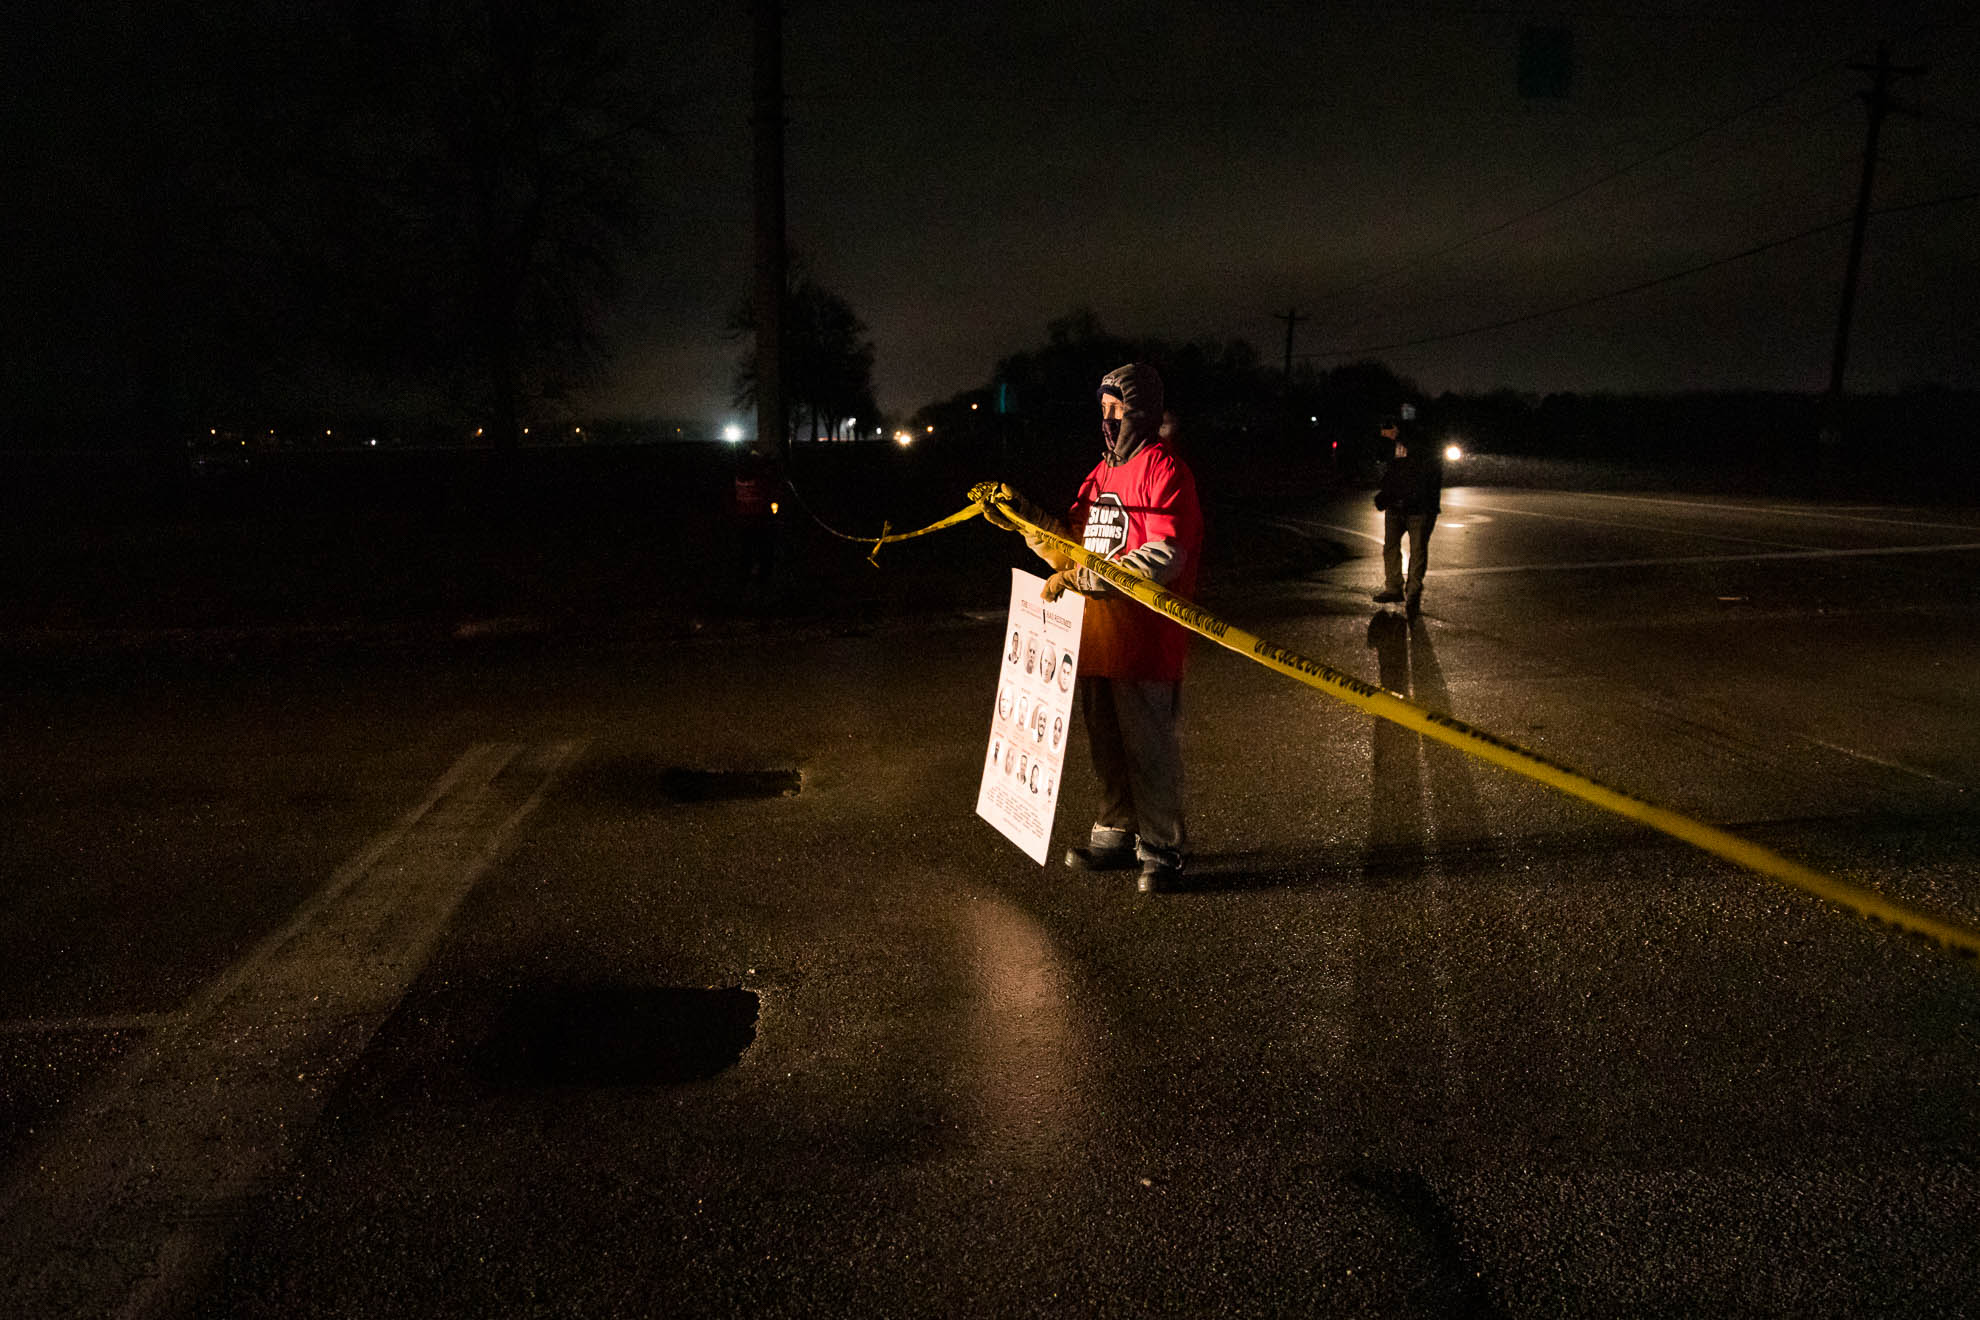 A protestor blocks the main driveway entrance to the prison with “crime scene” tape